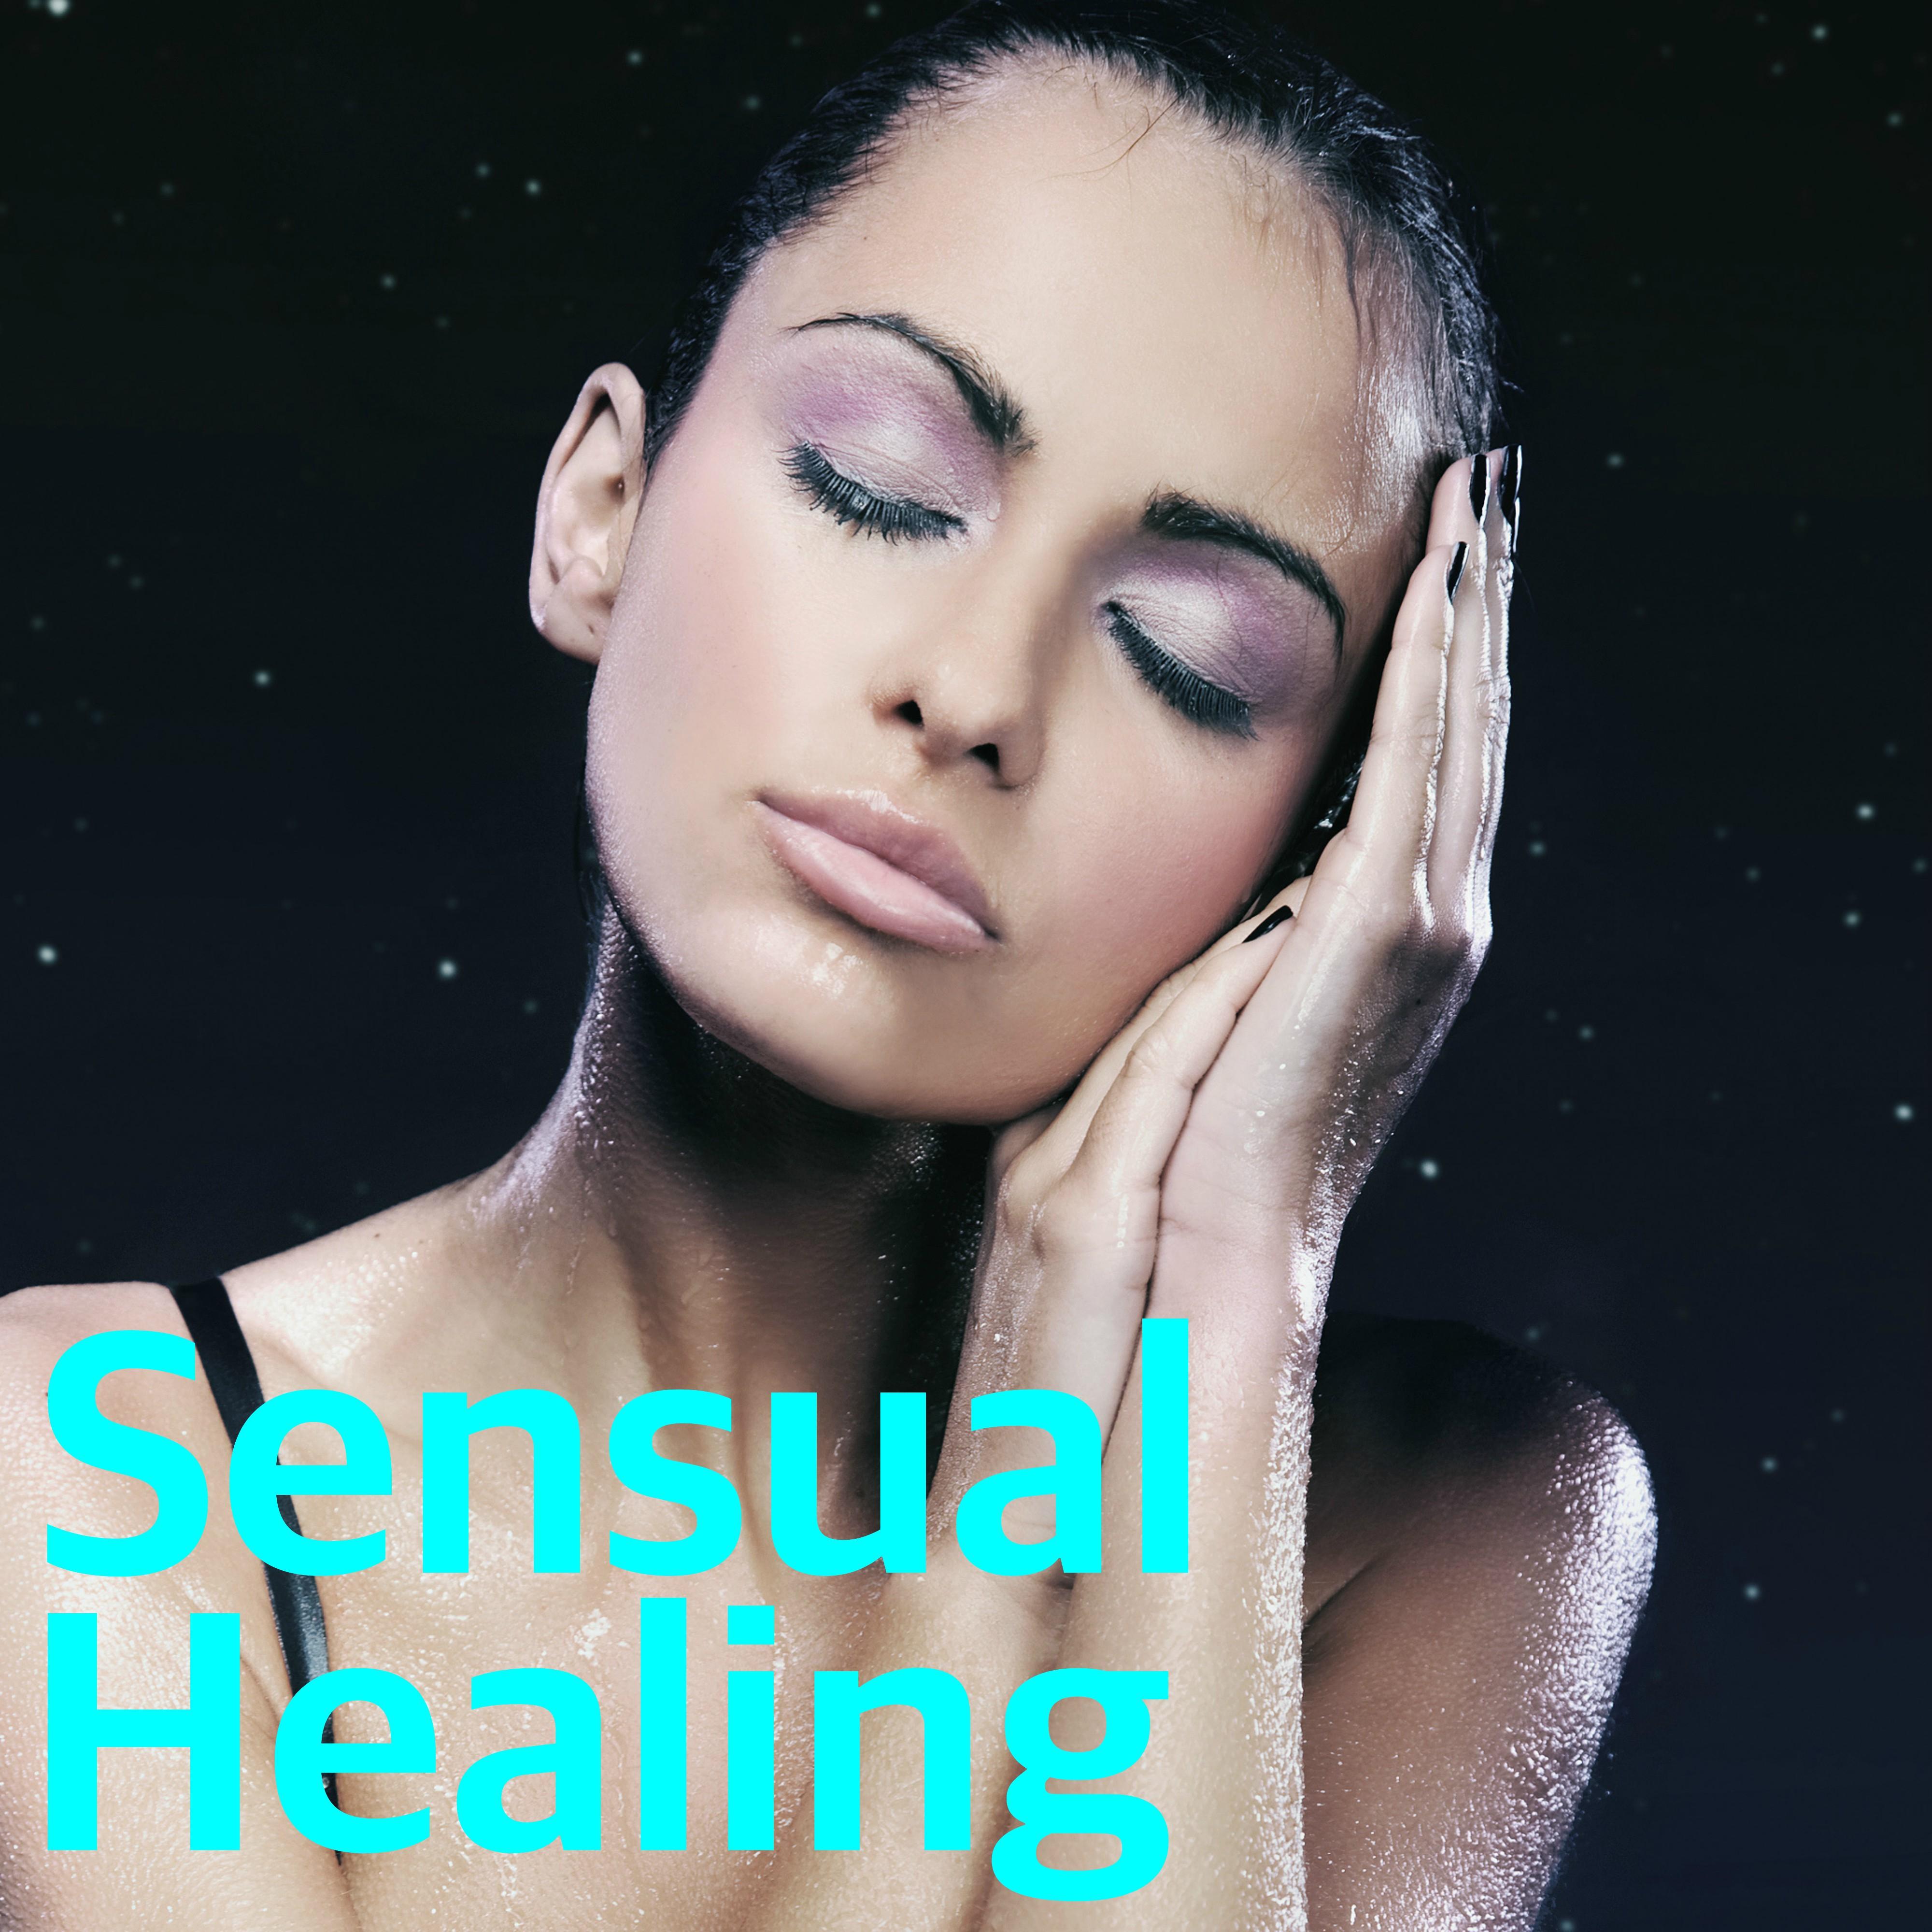 Ambient - Background Music for Sexual Healing